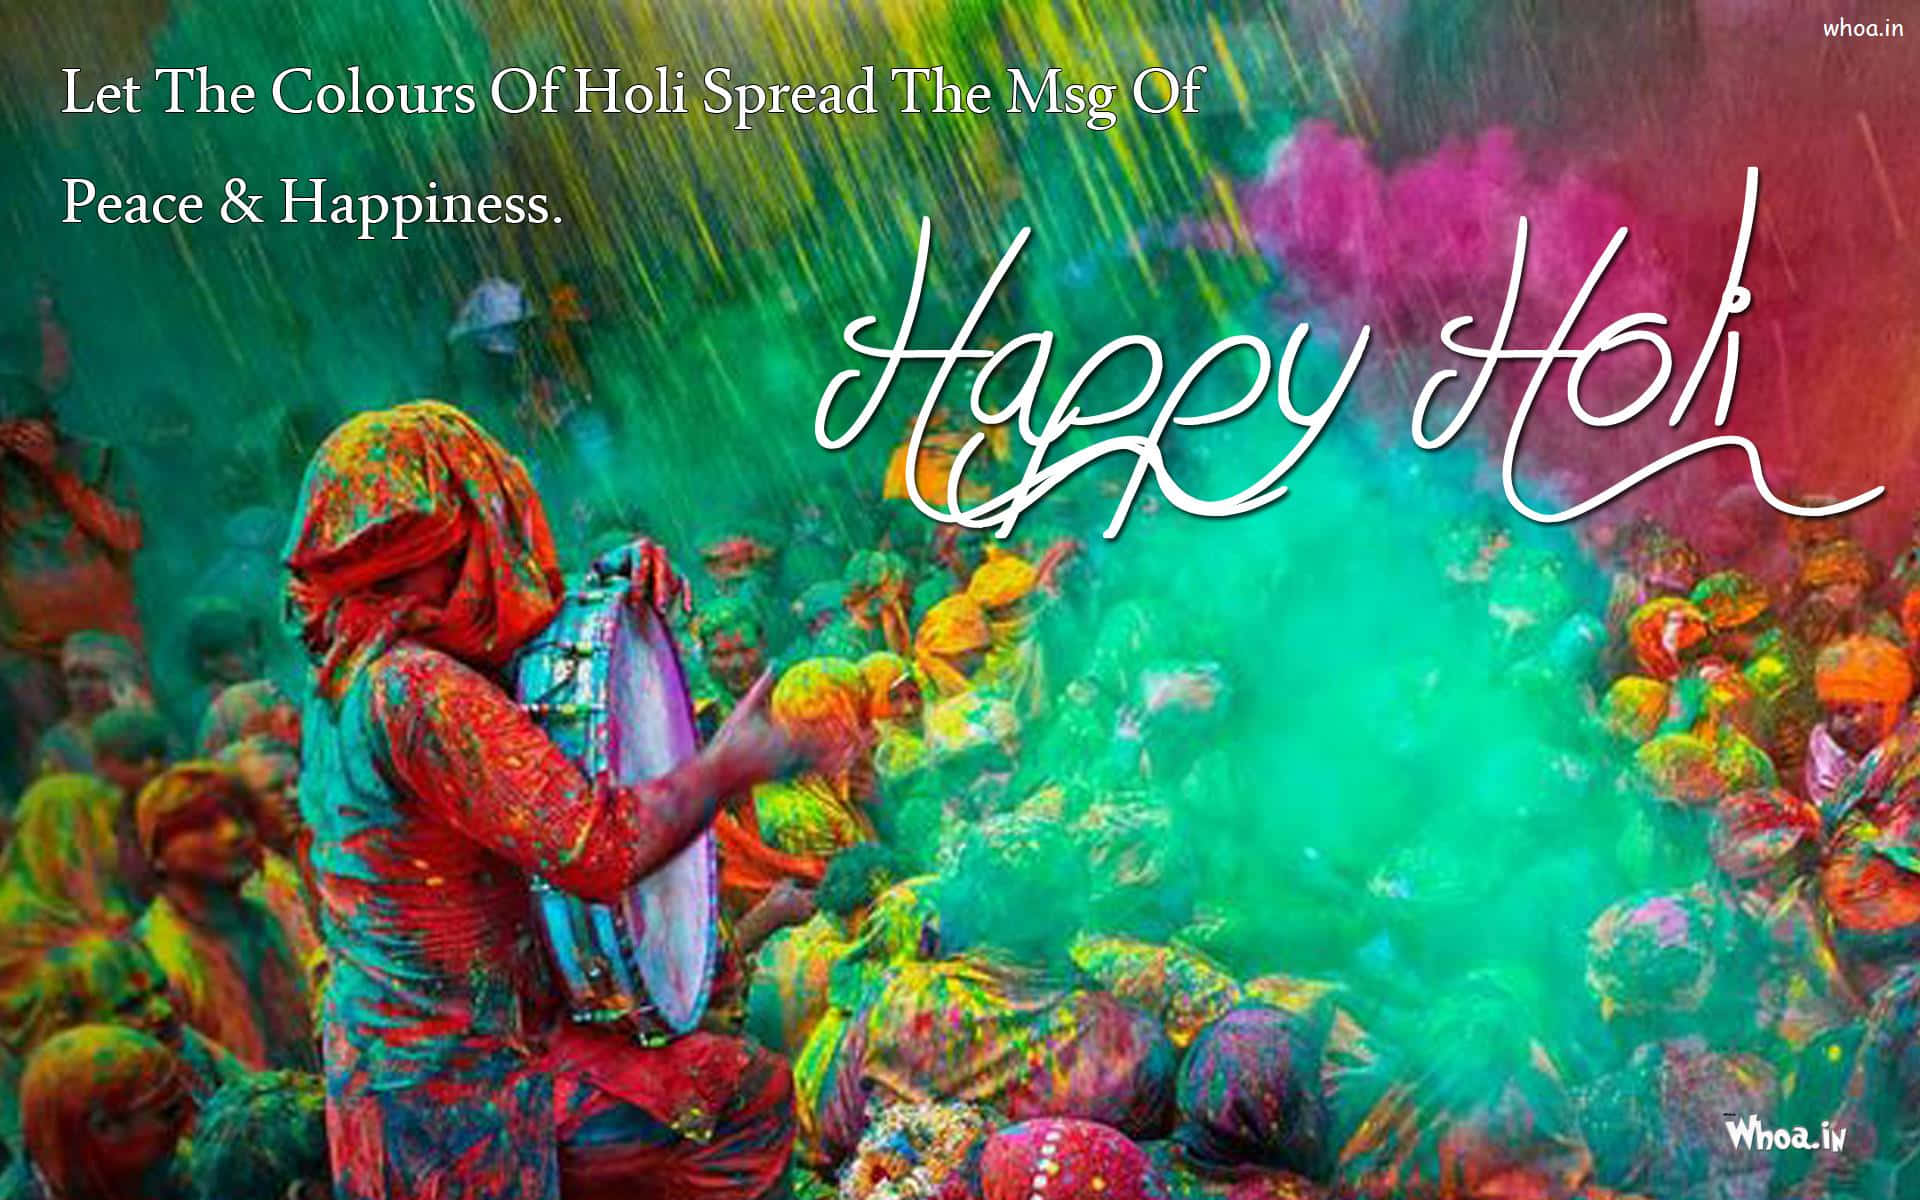 Celebrate the joyous festival of Holi with loved ones